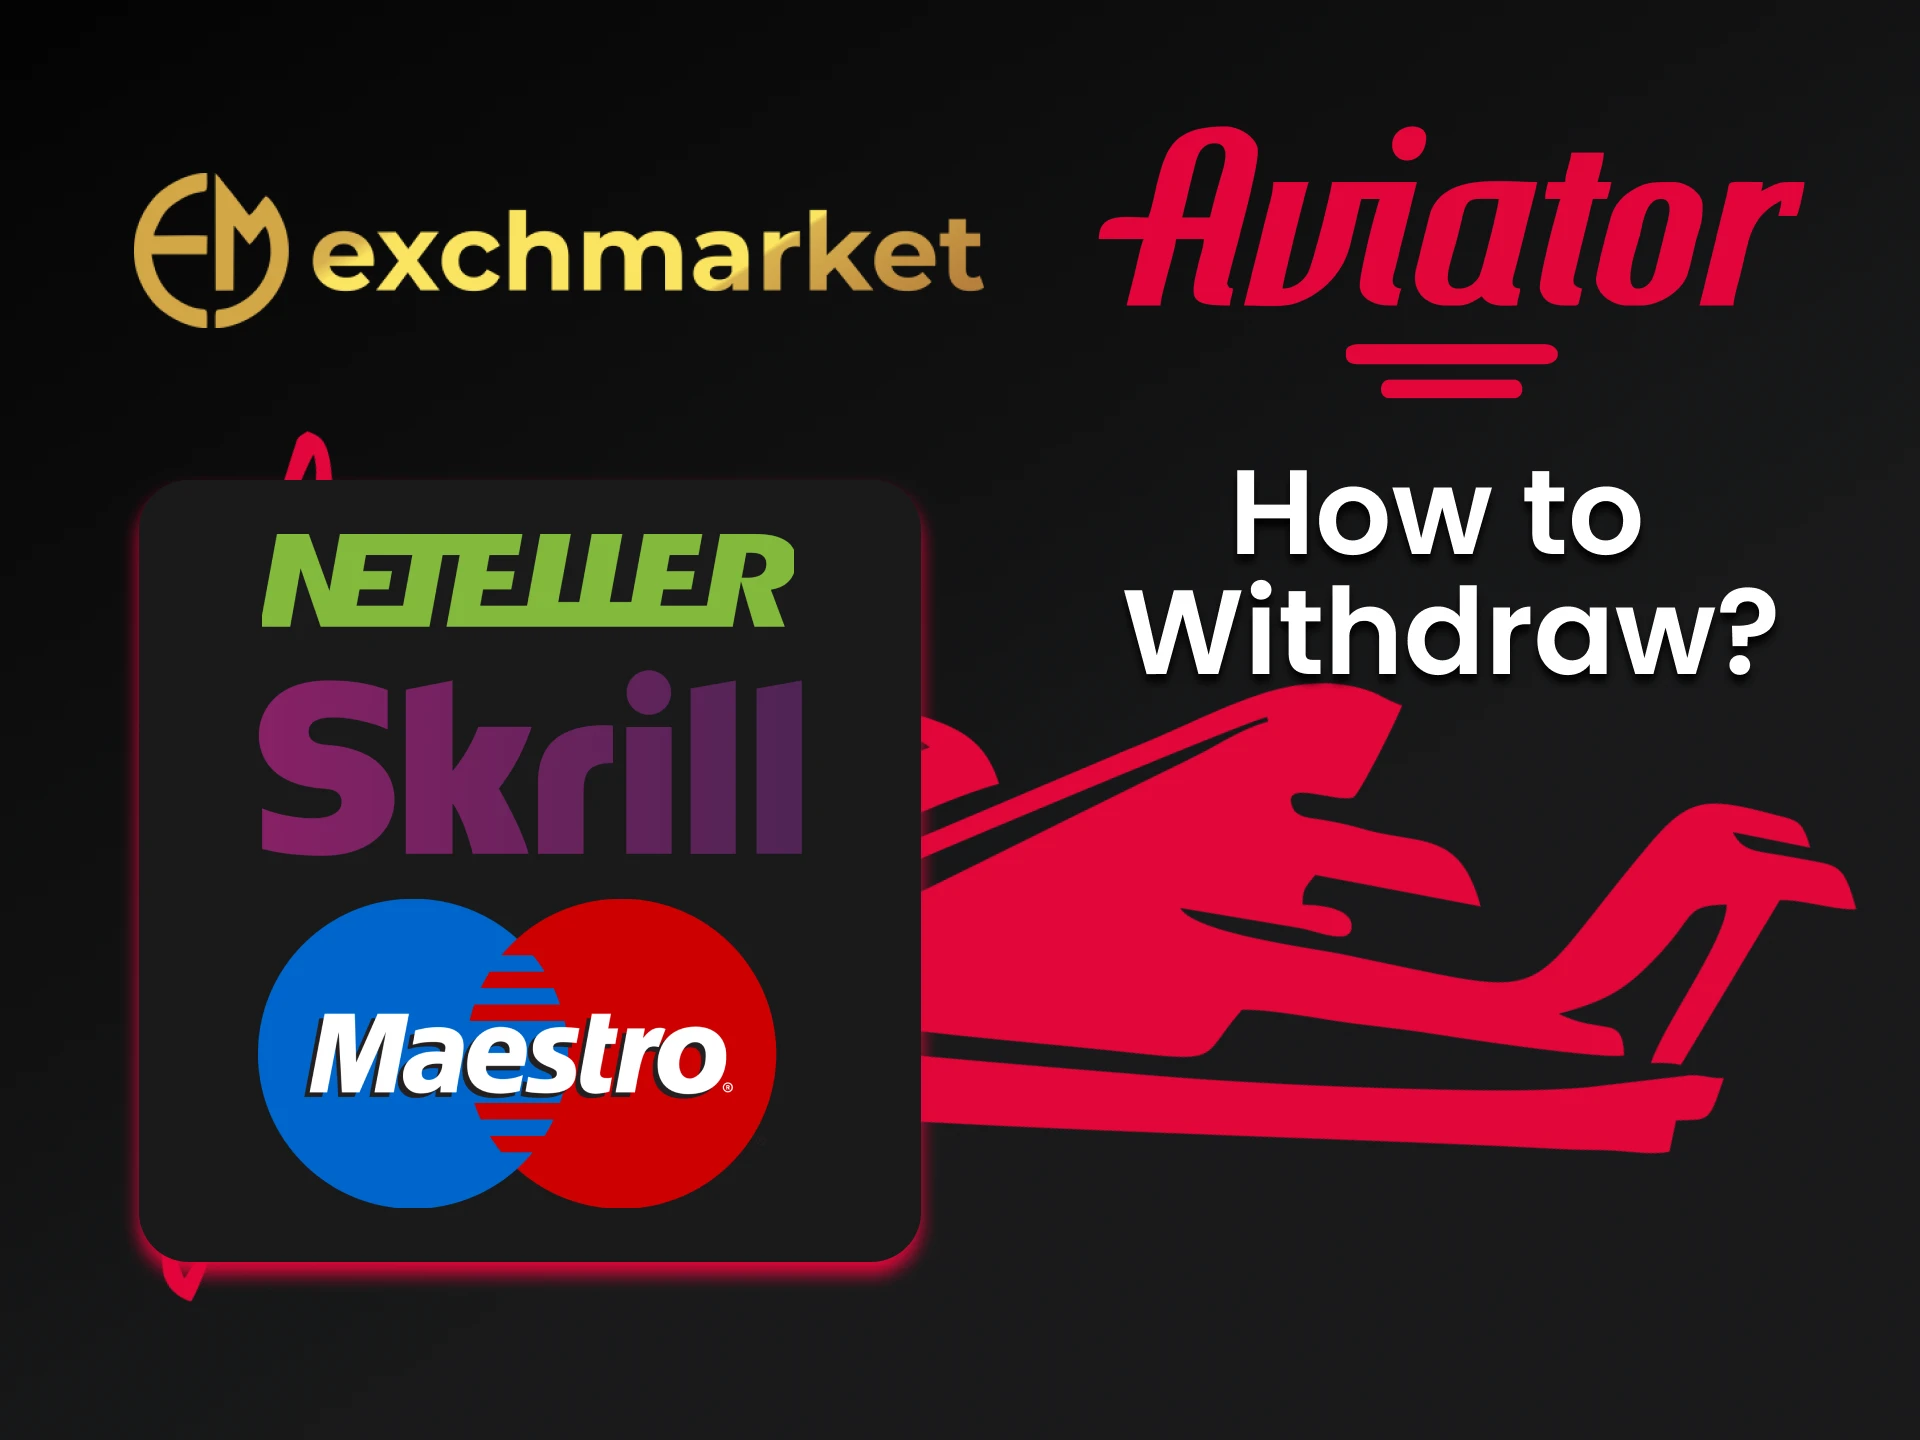 Withdraw your winnings to Aviator from Exchmarket.